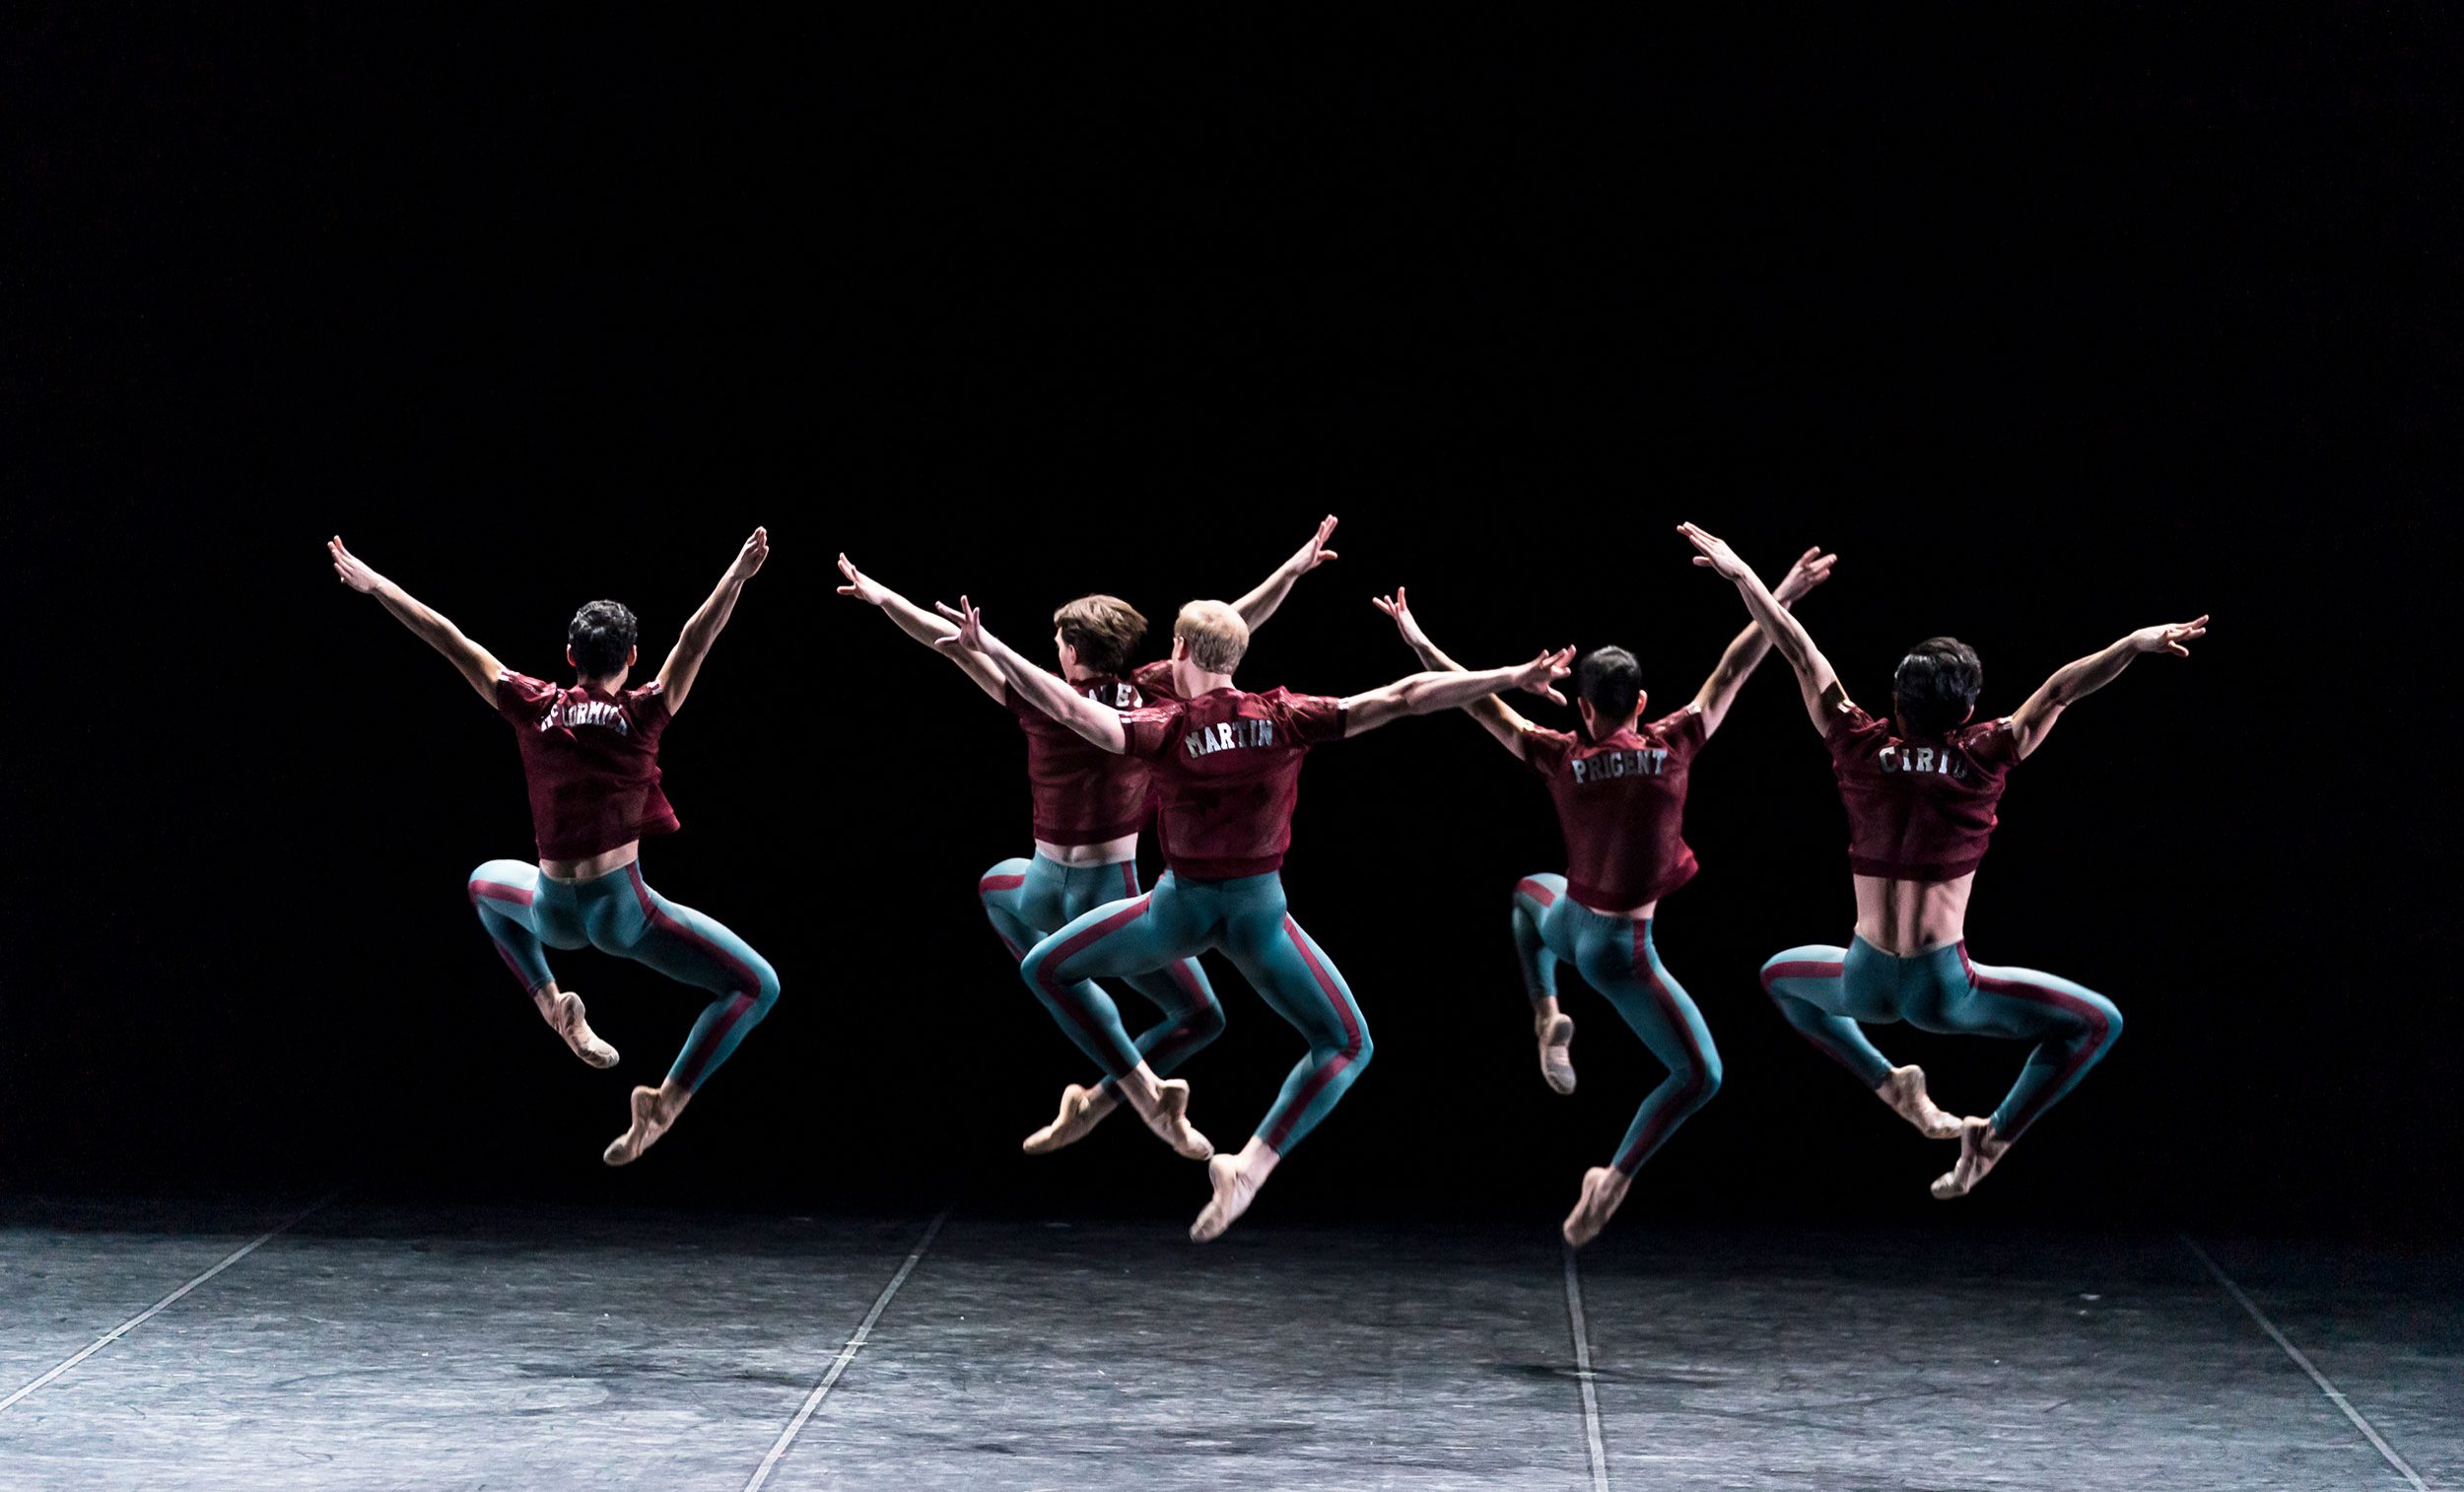 English National Ballet in William Forsythe's Playlist (Track 2) during the 70th Anniversary Gala © Bill Cooper.